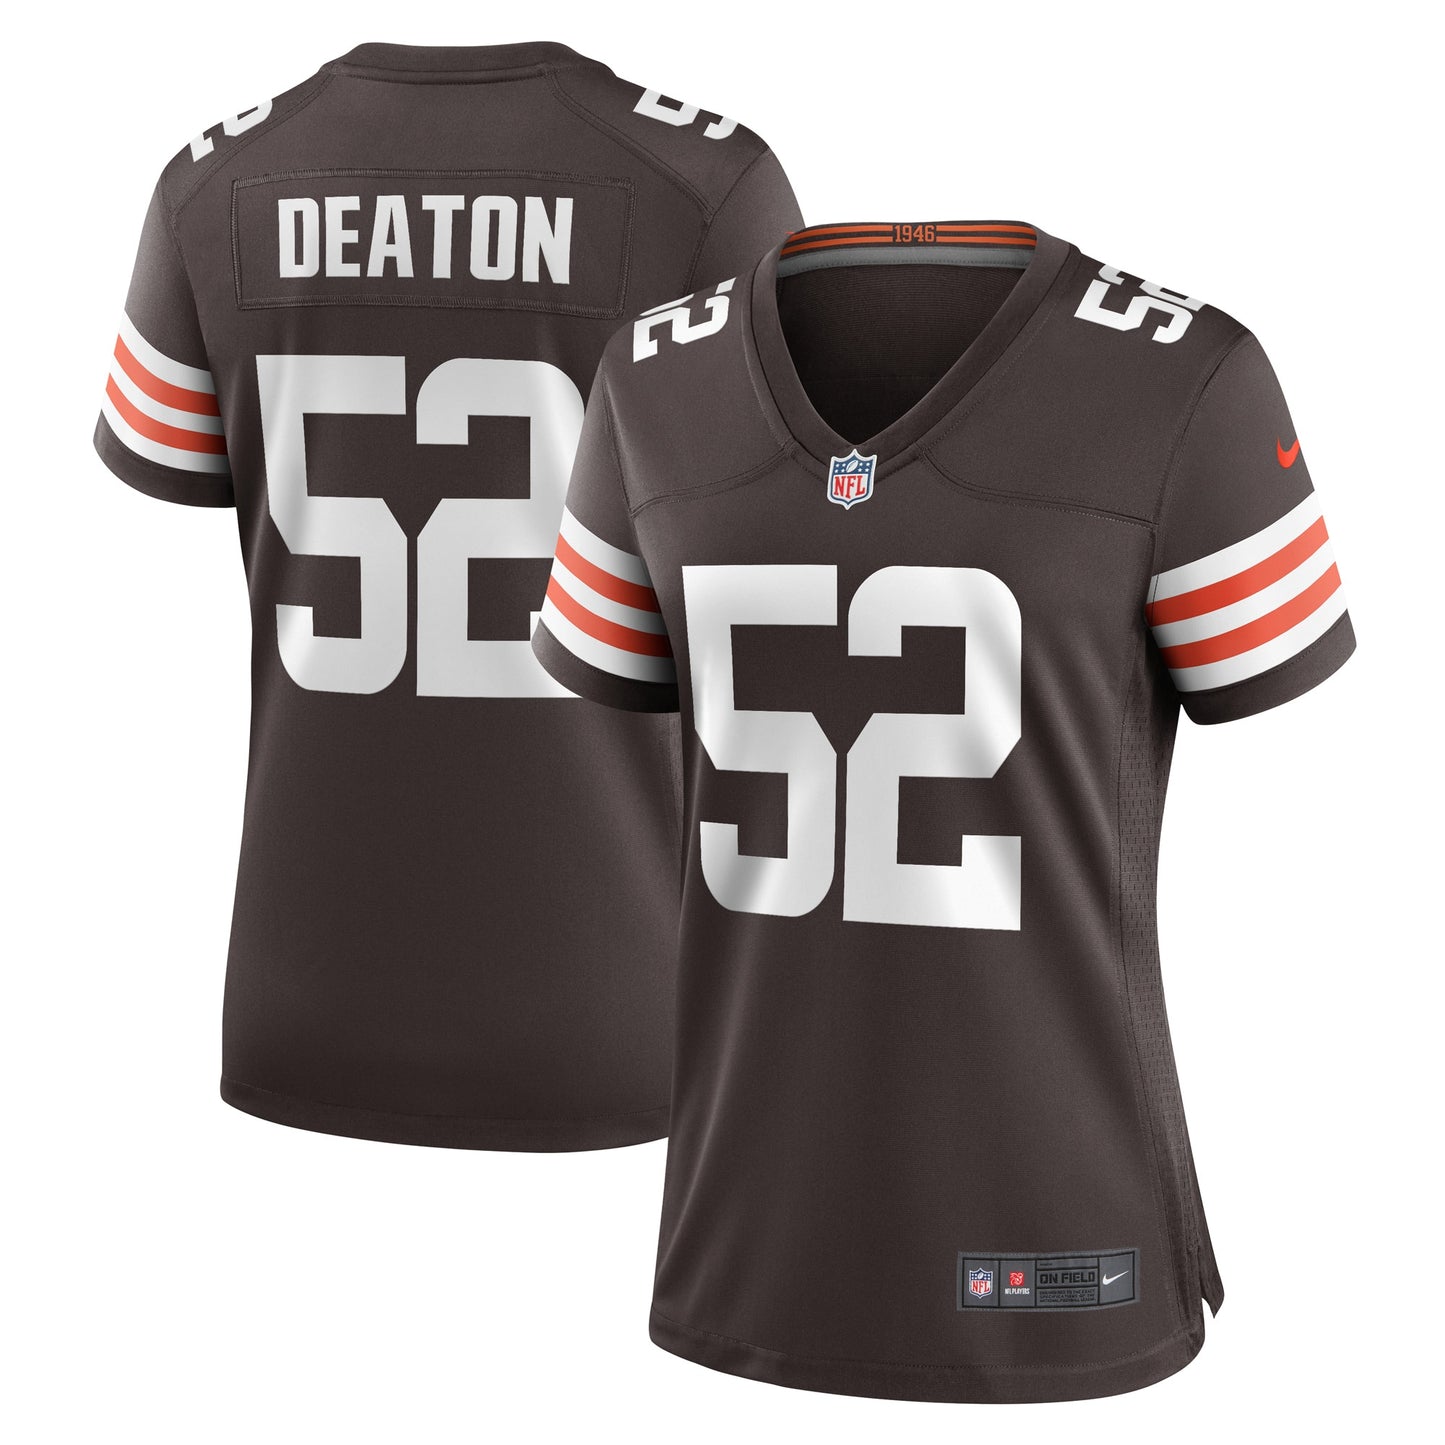 Dawson Deaton Cleveland Browns Nike Women's Game Player Jersey - Brown